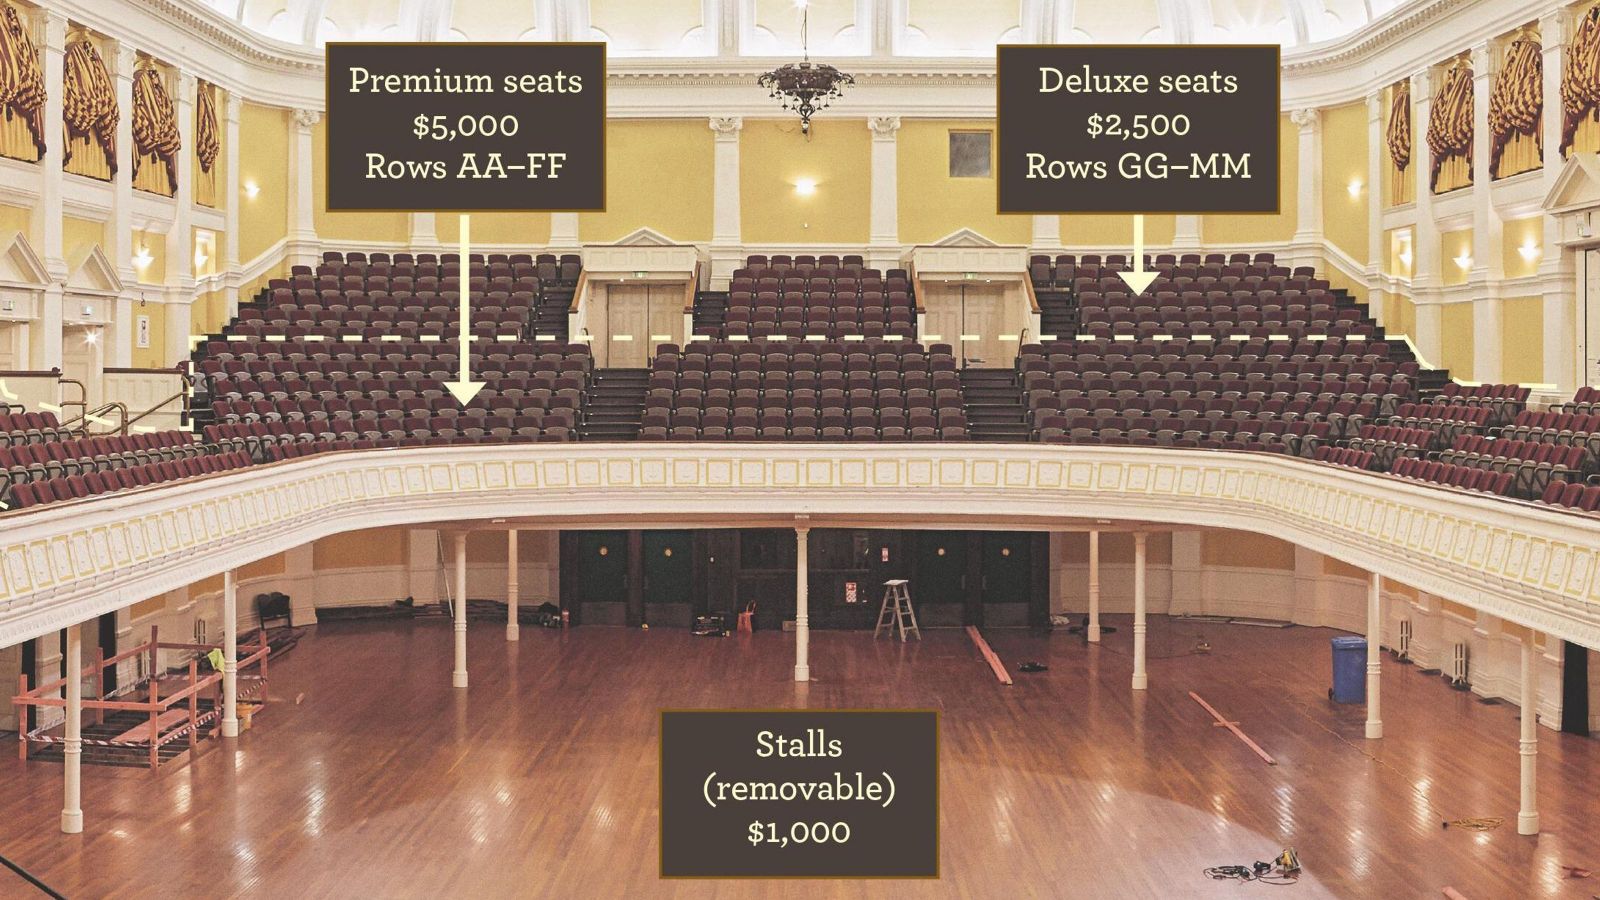 Photo of the inside of the Wellington Town Hall with overlaid text showing where the standard, deluxe and premium seats are located.